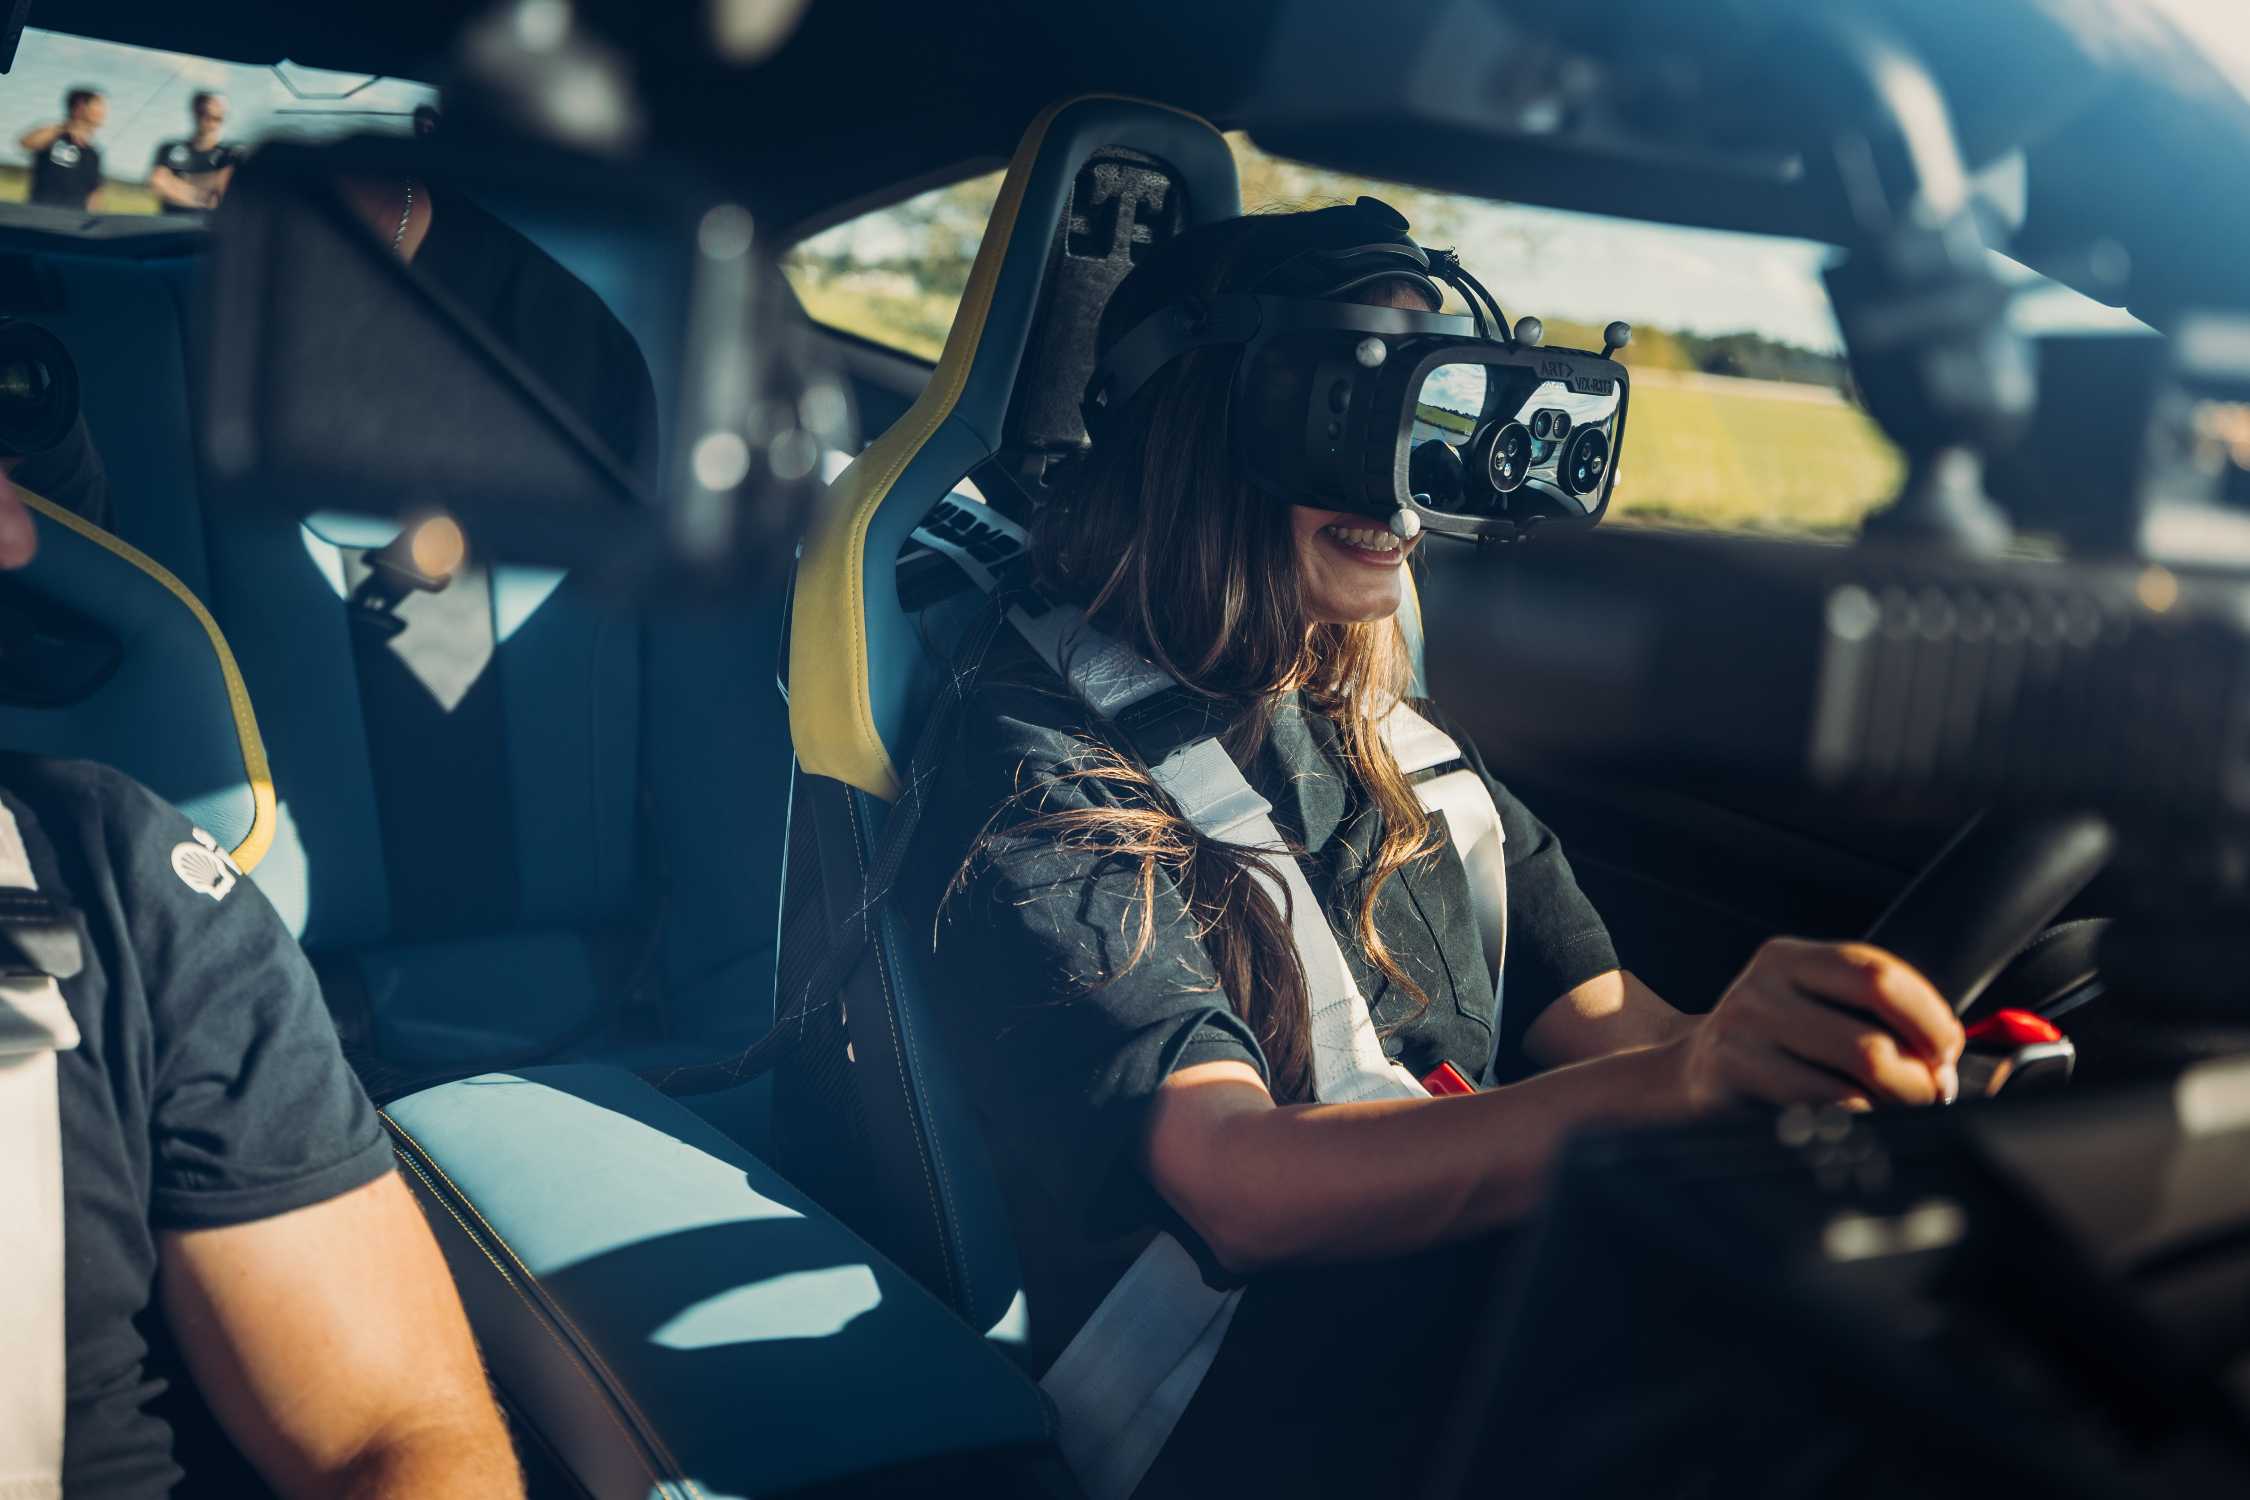 The BMW M Driving Experience presents ground-breaking BMW M Mixed Reality technology as an exclusive offer for customers.